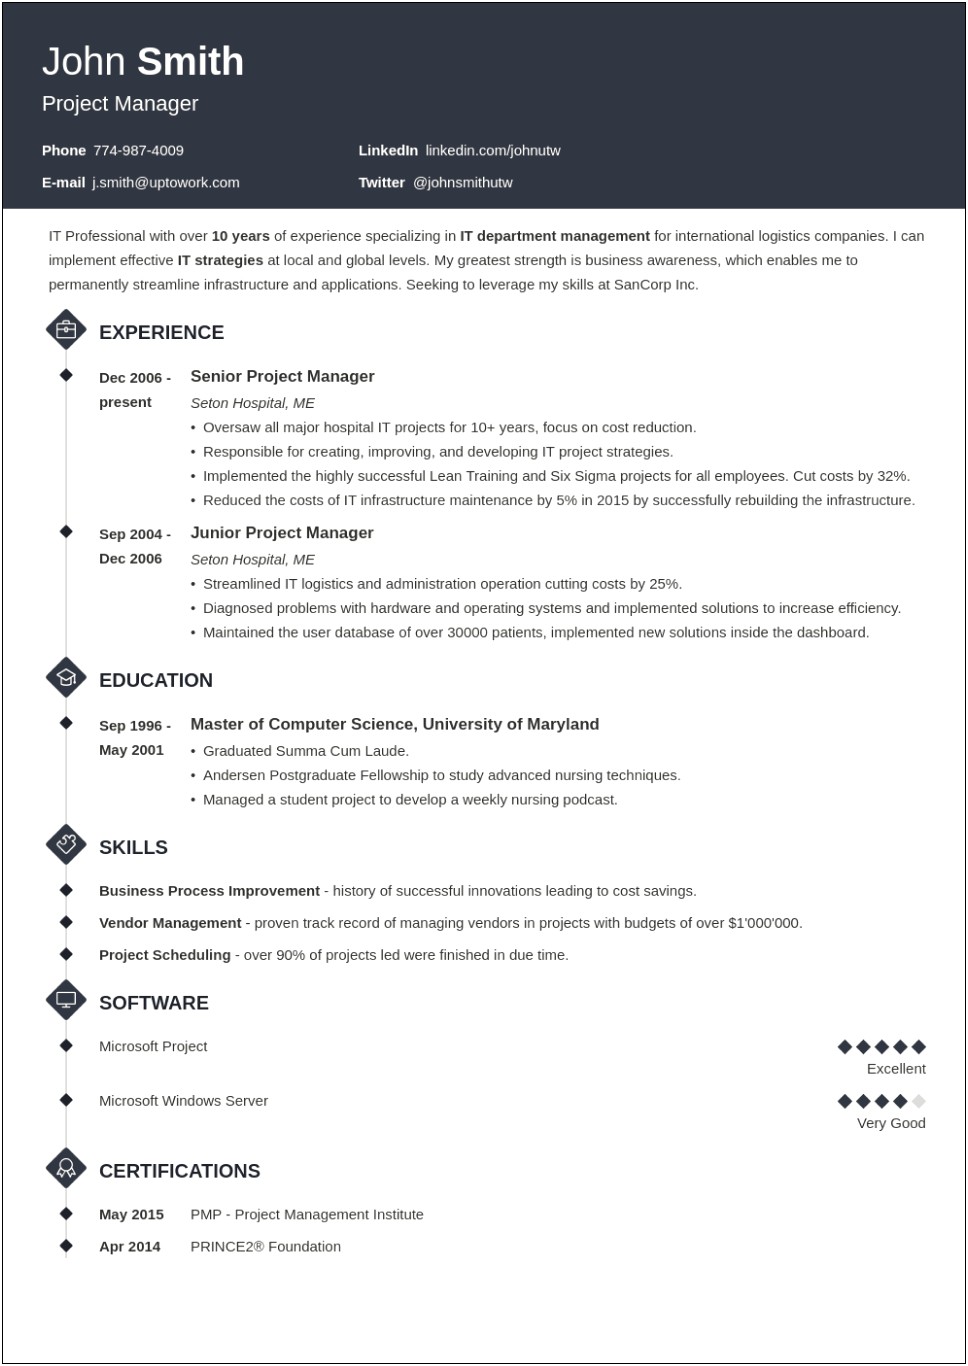 Can You Make Good Money Selling Resume Templates